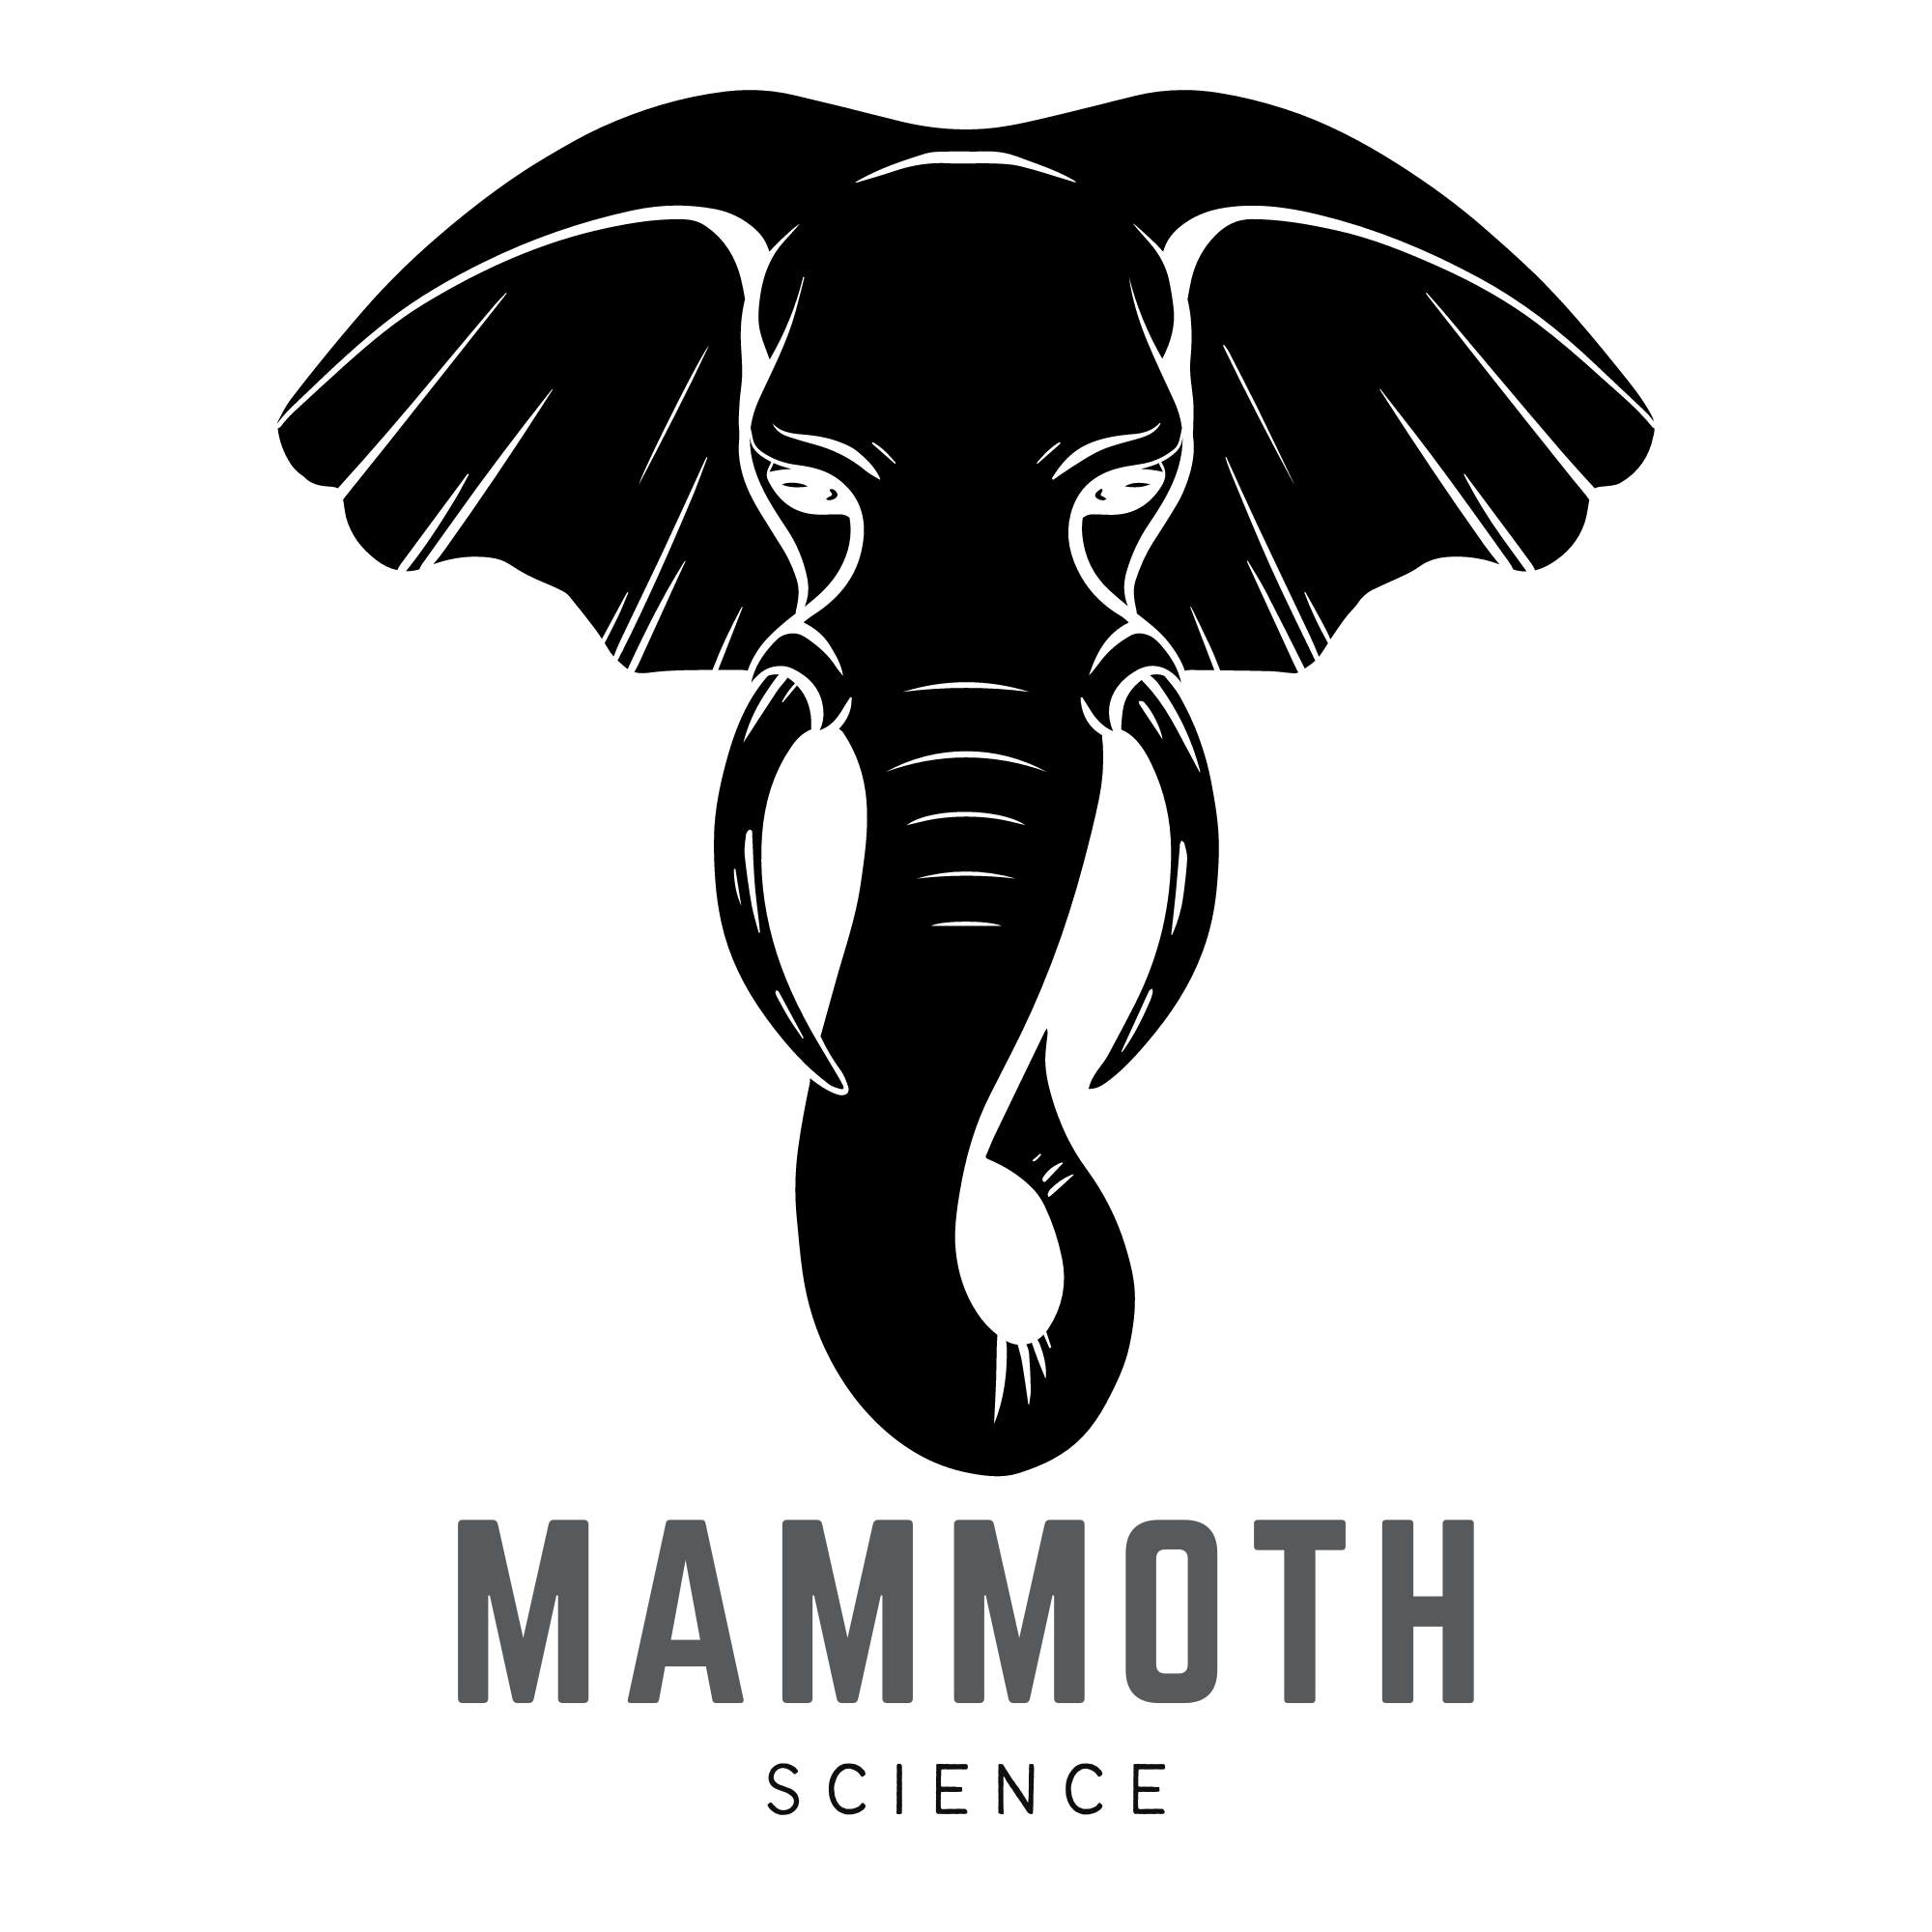 Mammoth Science – Your place for biology education